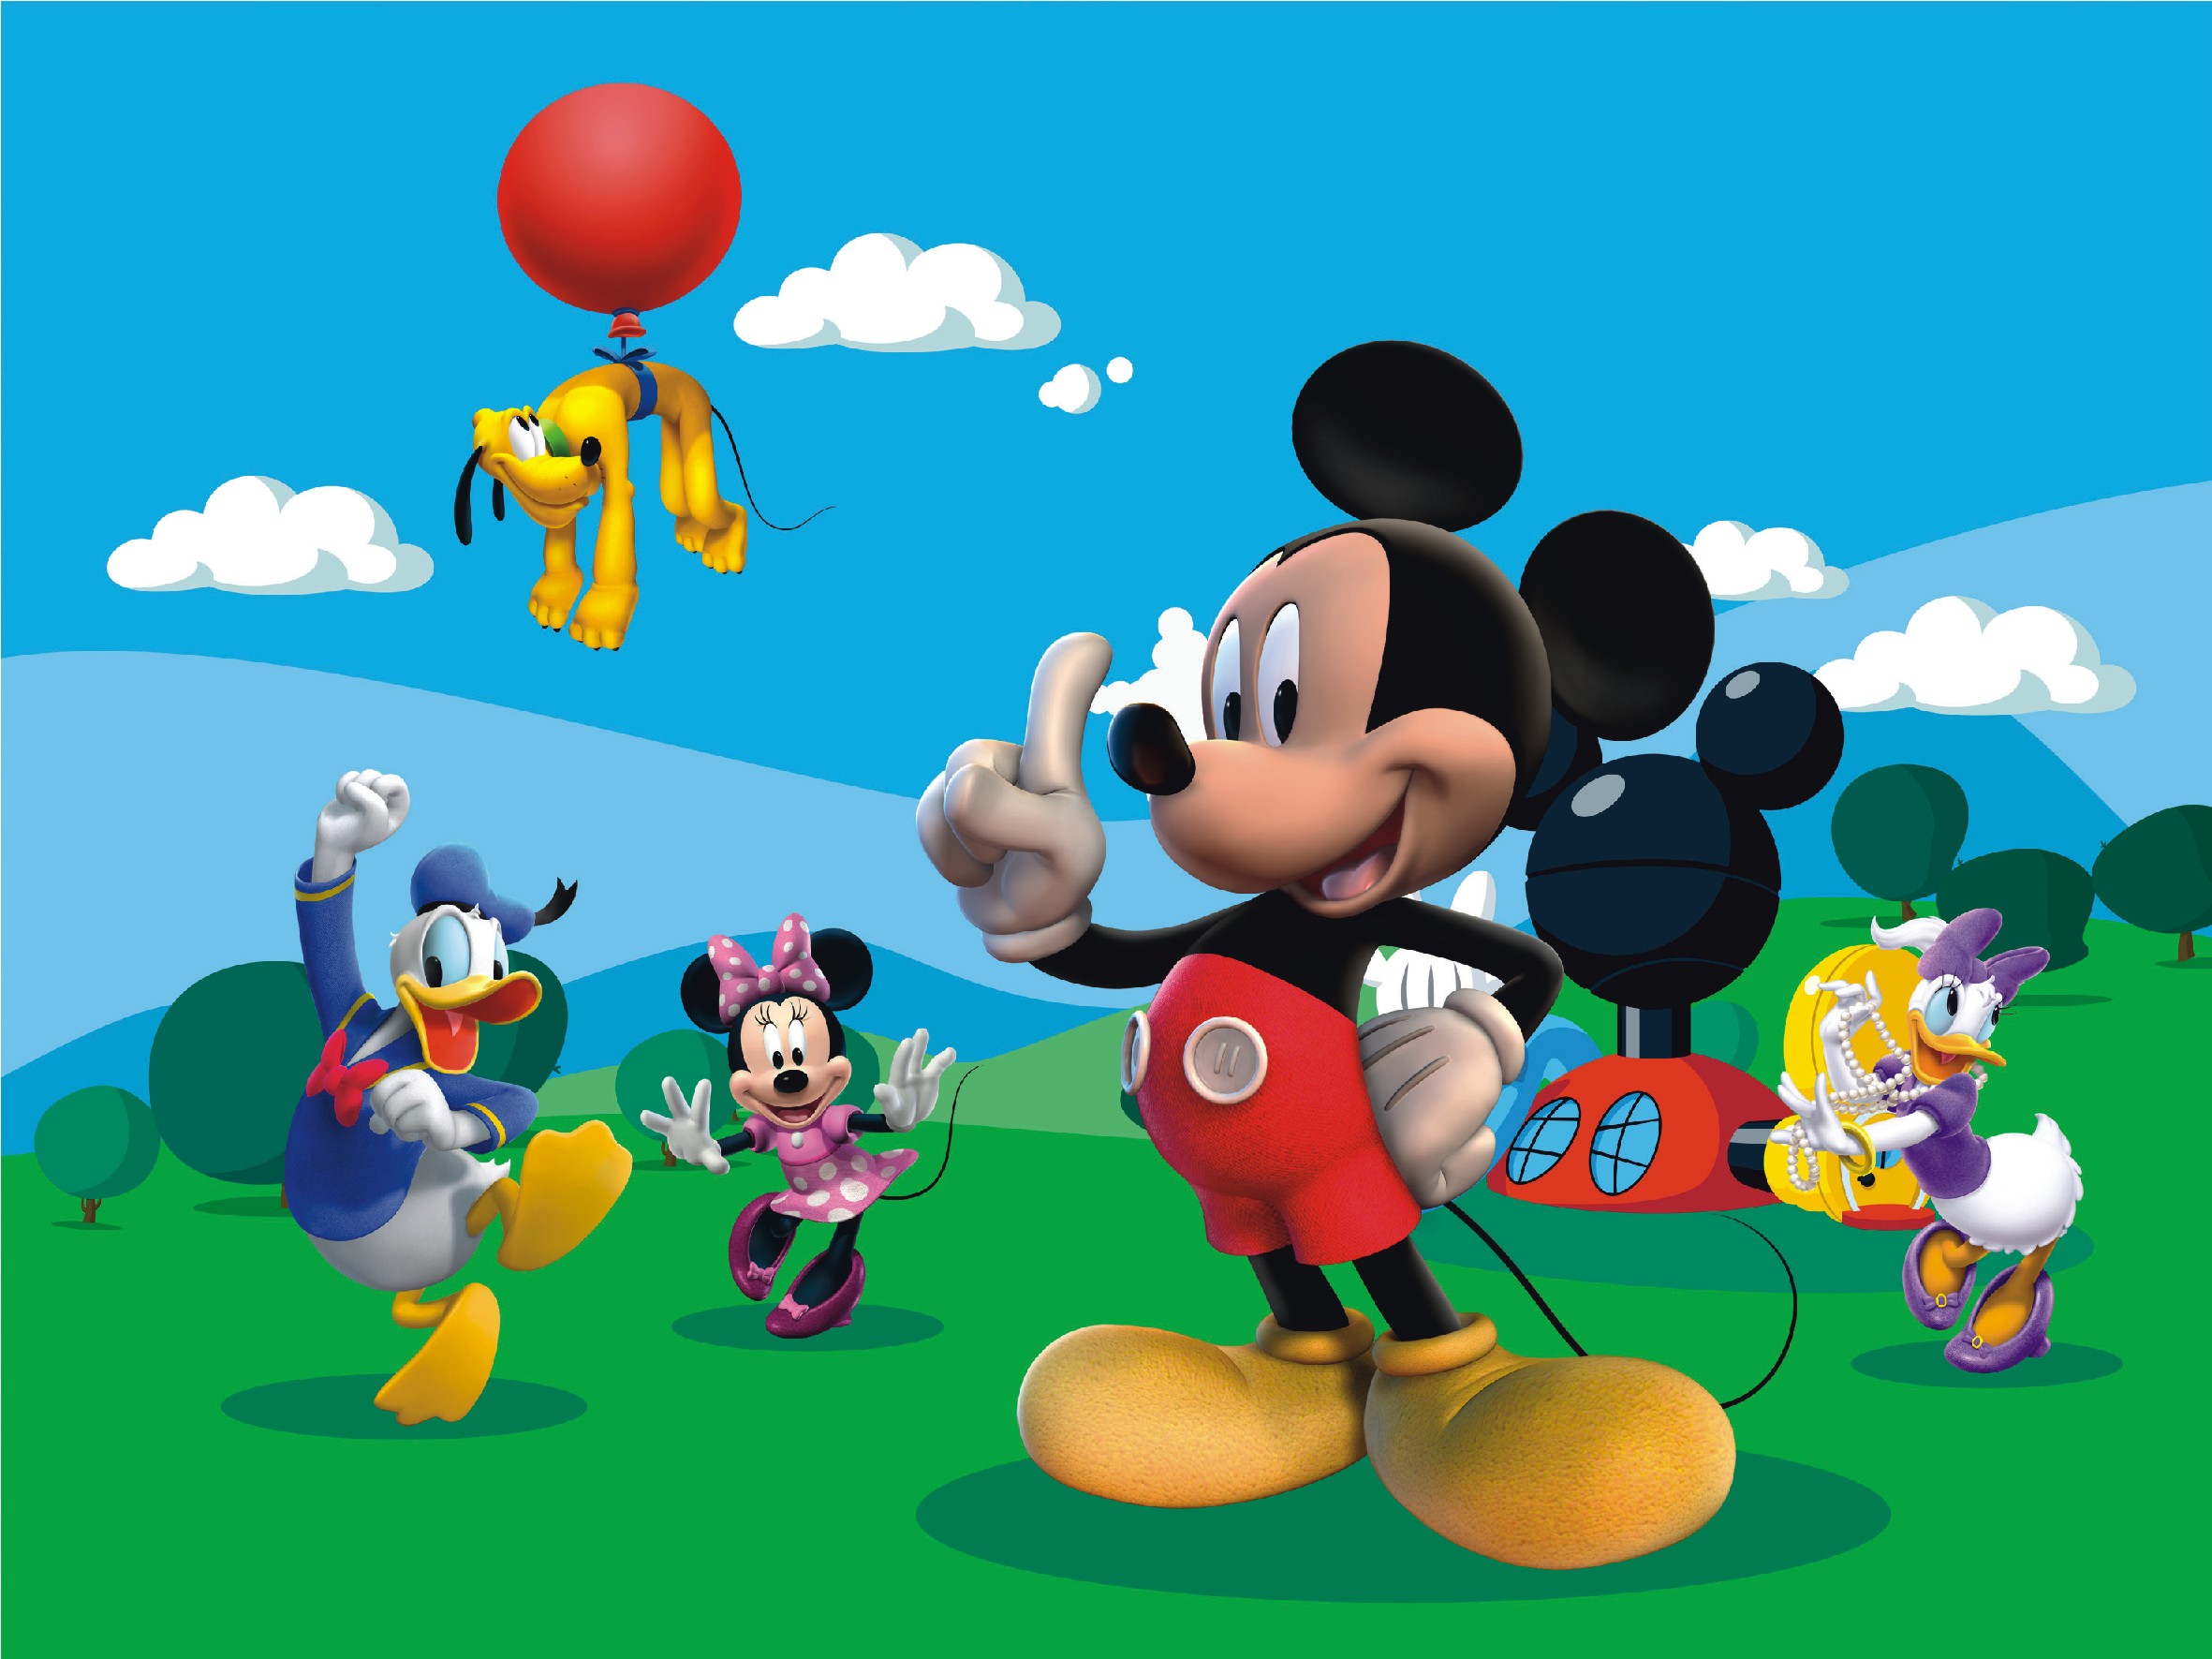 Mickey mouse clubhouse images wallpapers